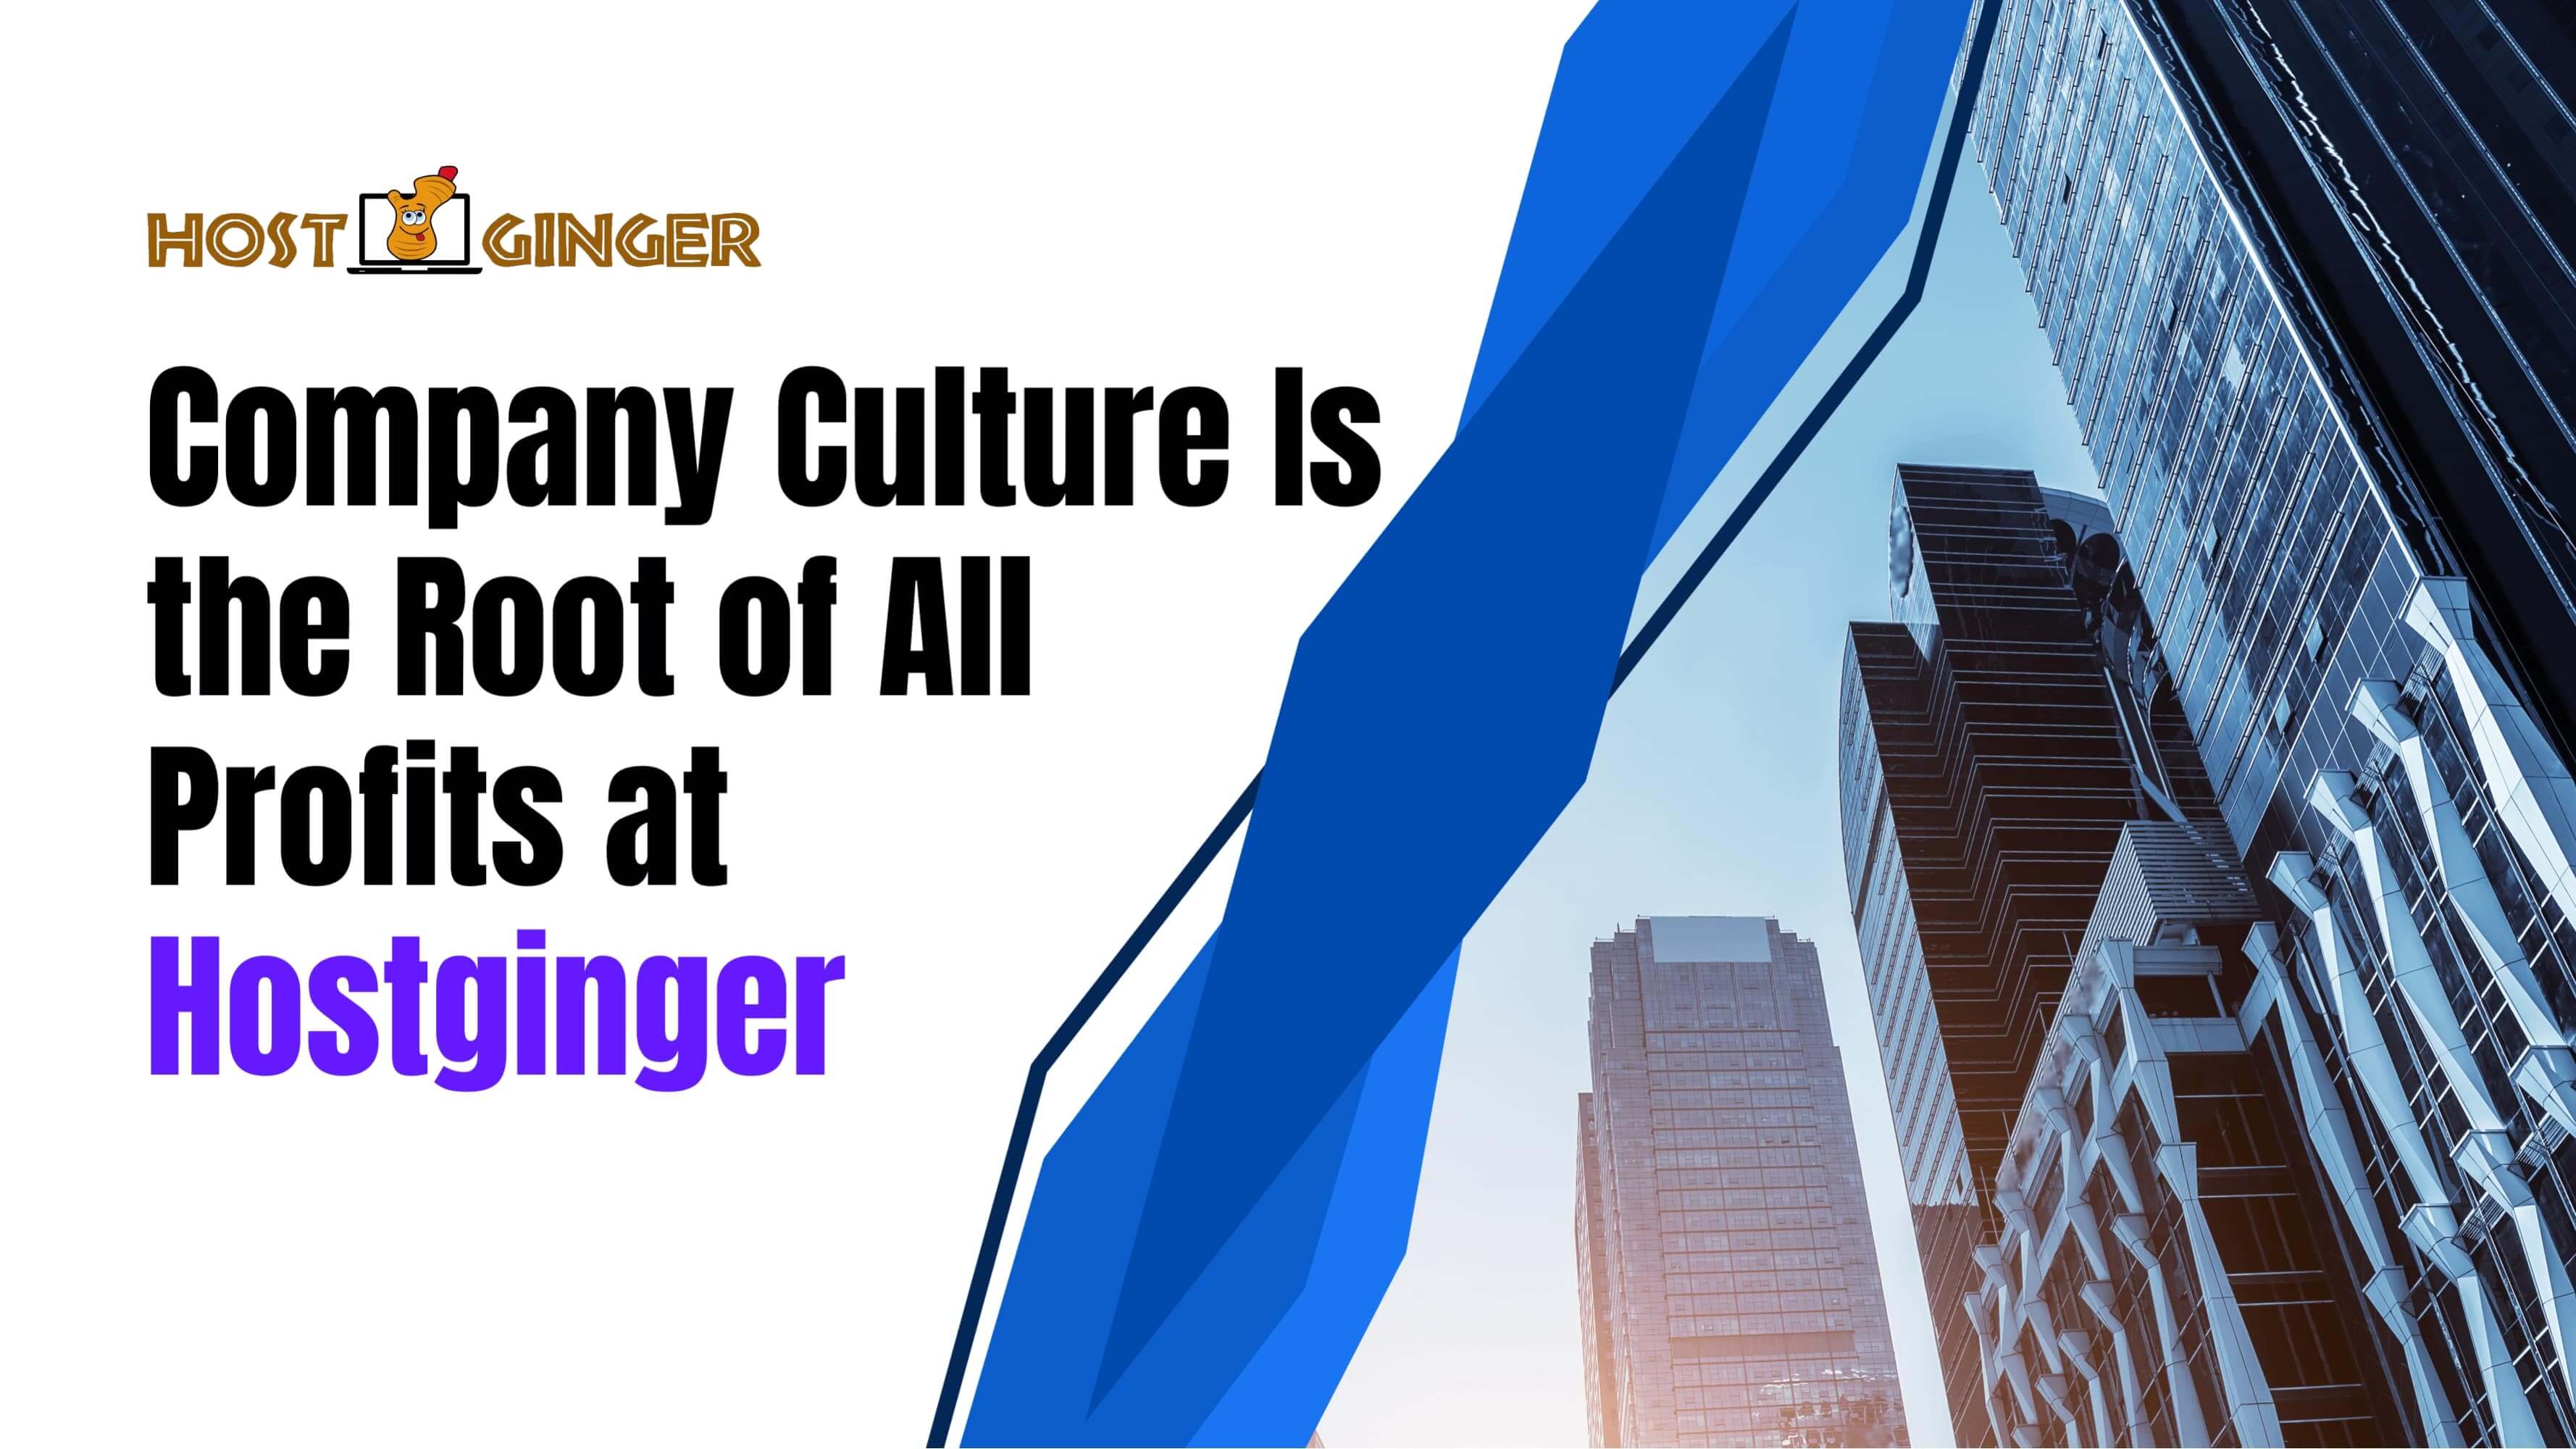 Company Culture Is the Root of All Profits at Hostginger